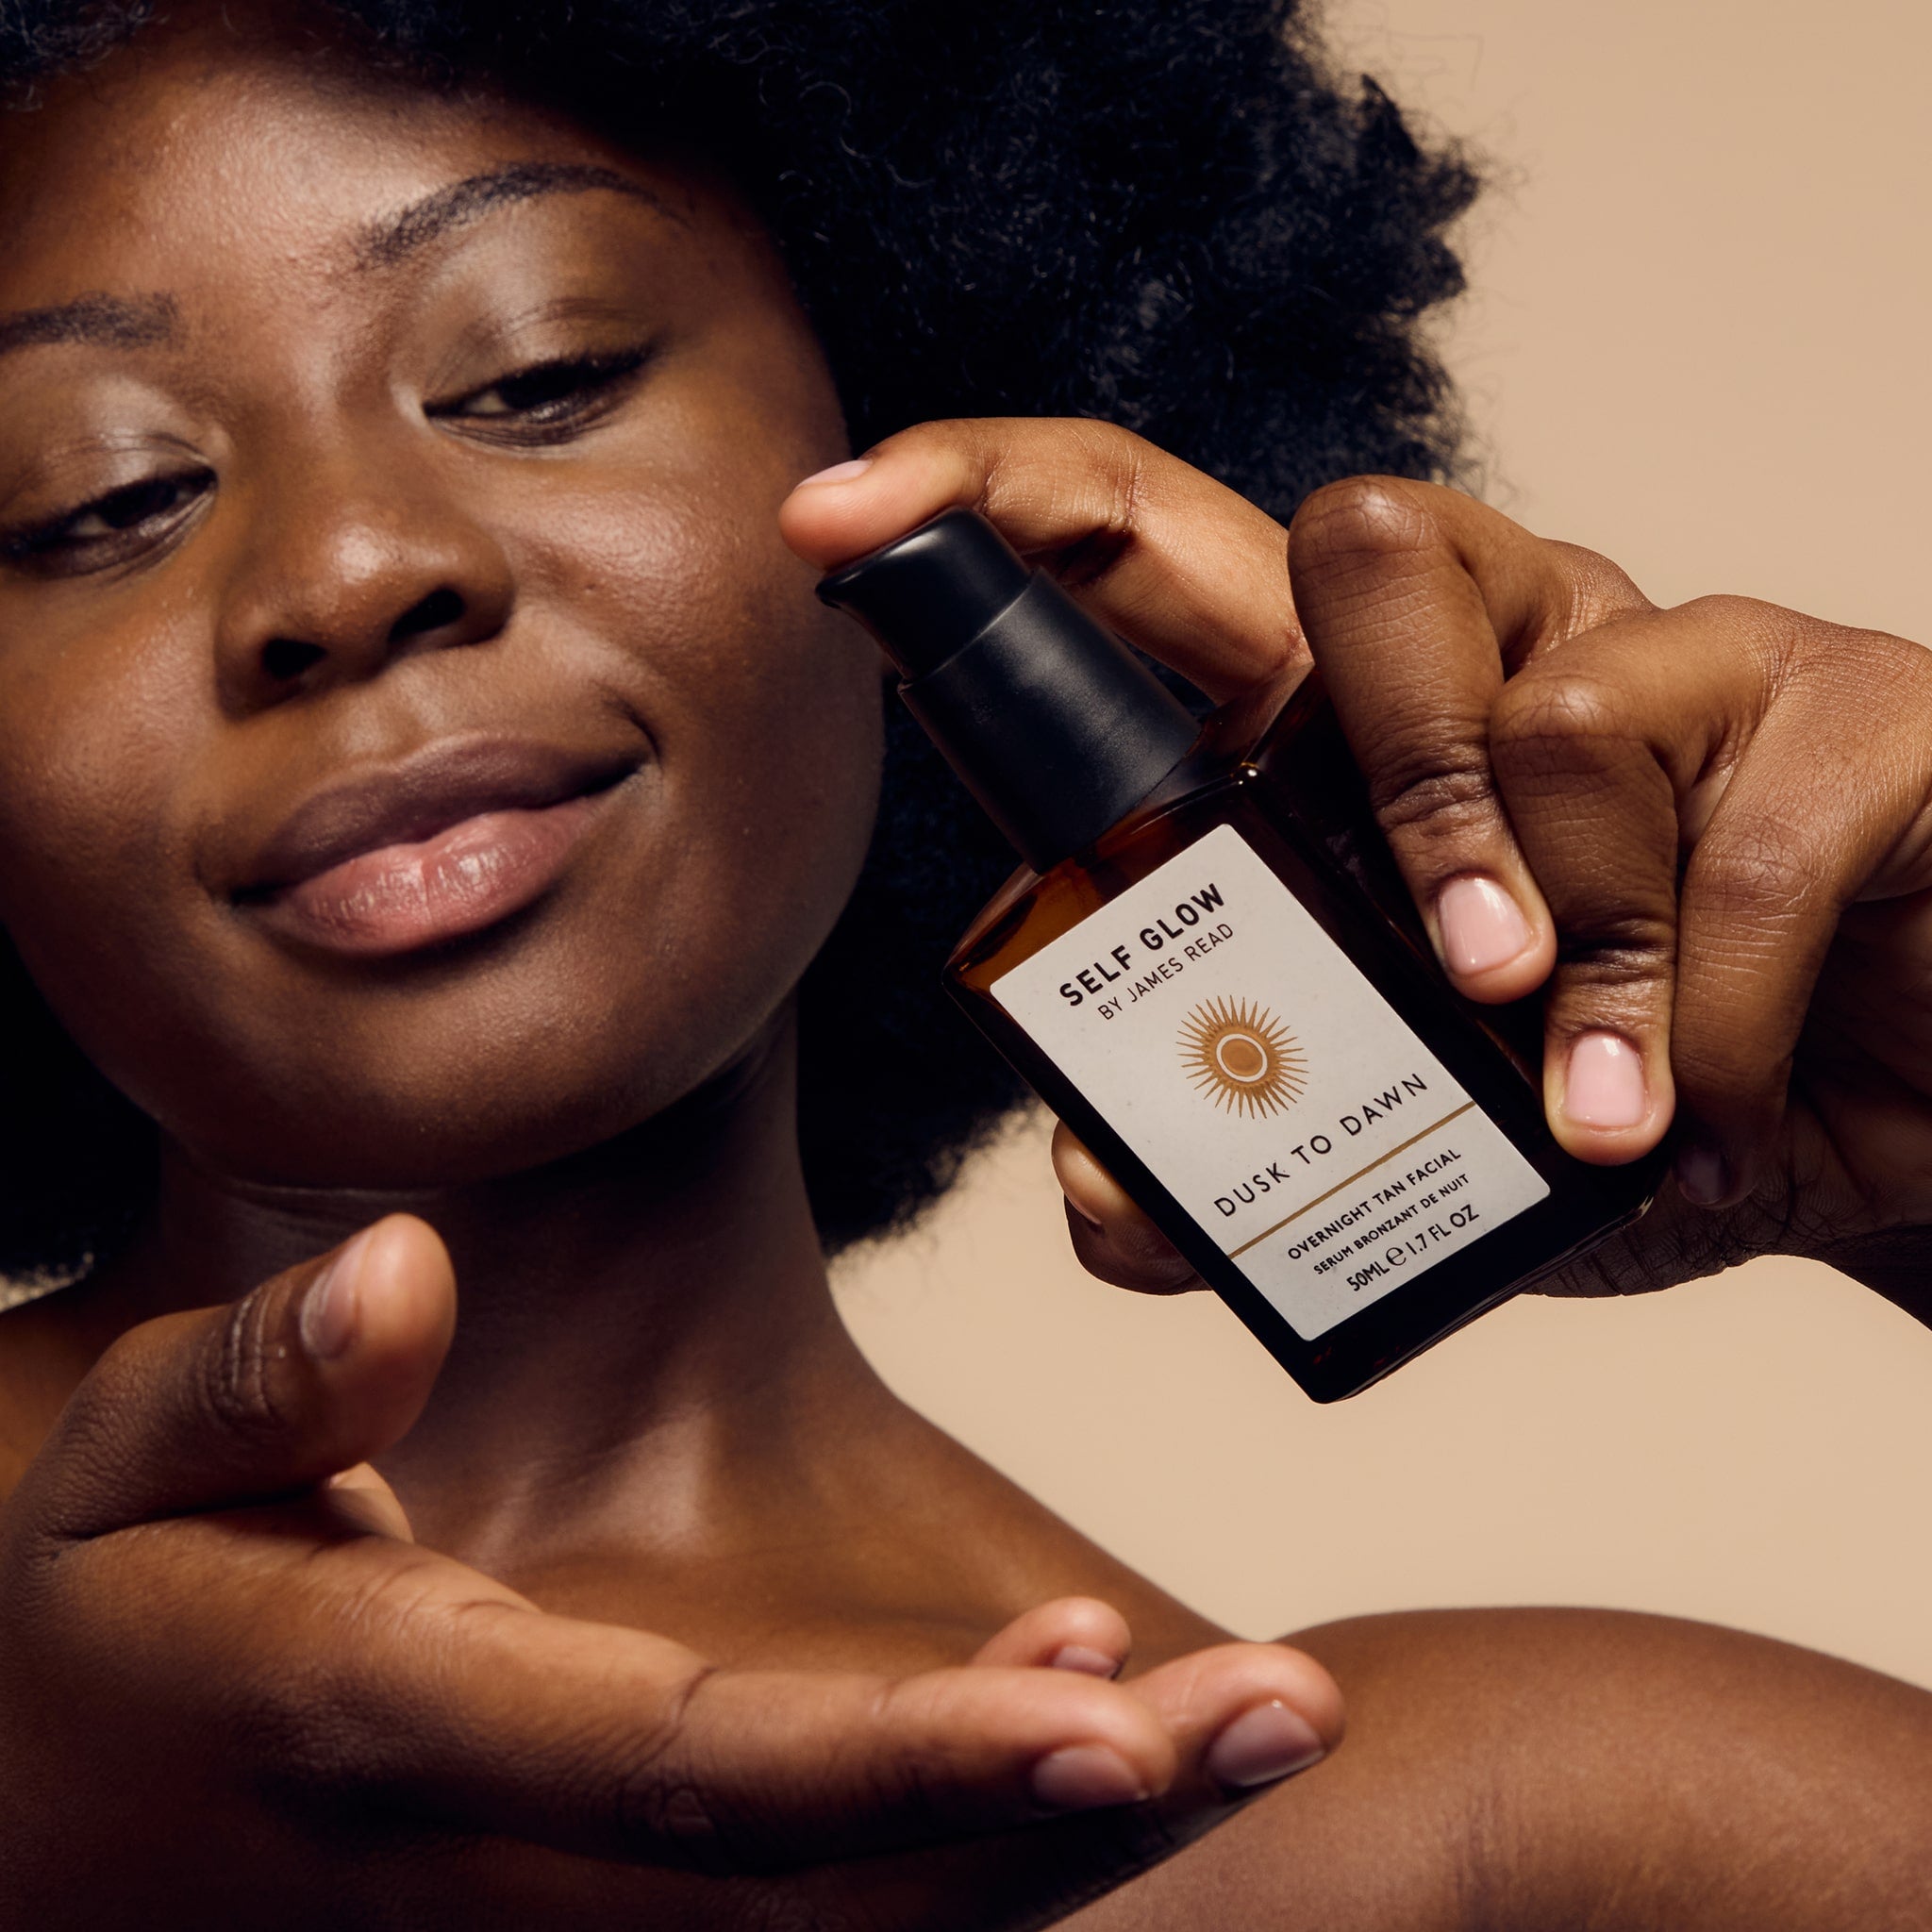 A black woman applying Self Glow by James Read Dusk to Dawn Overnight Tan Facial to her hand, showcasing the product's suitability for all skin types and tones.